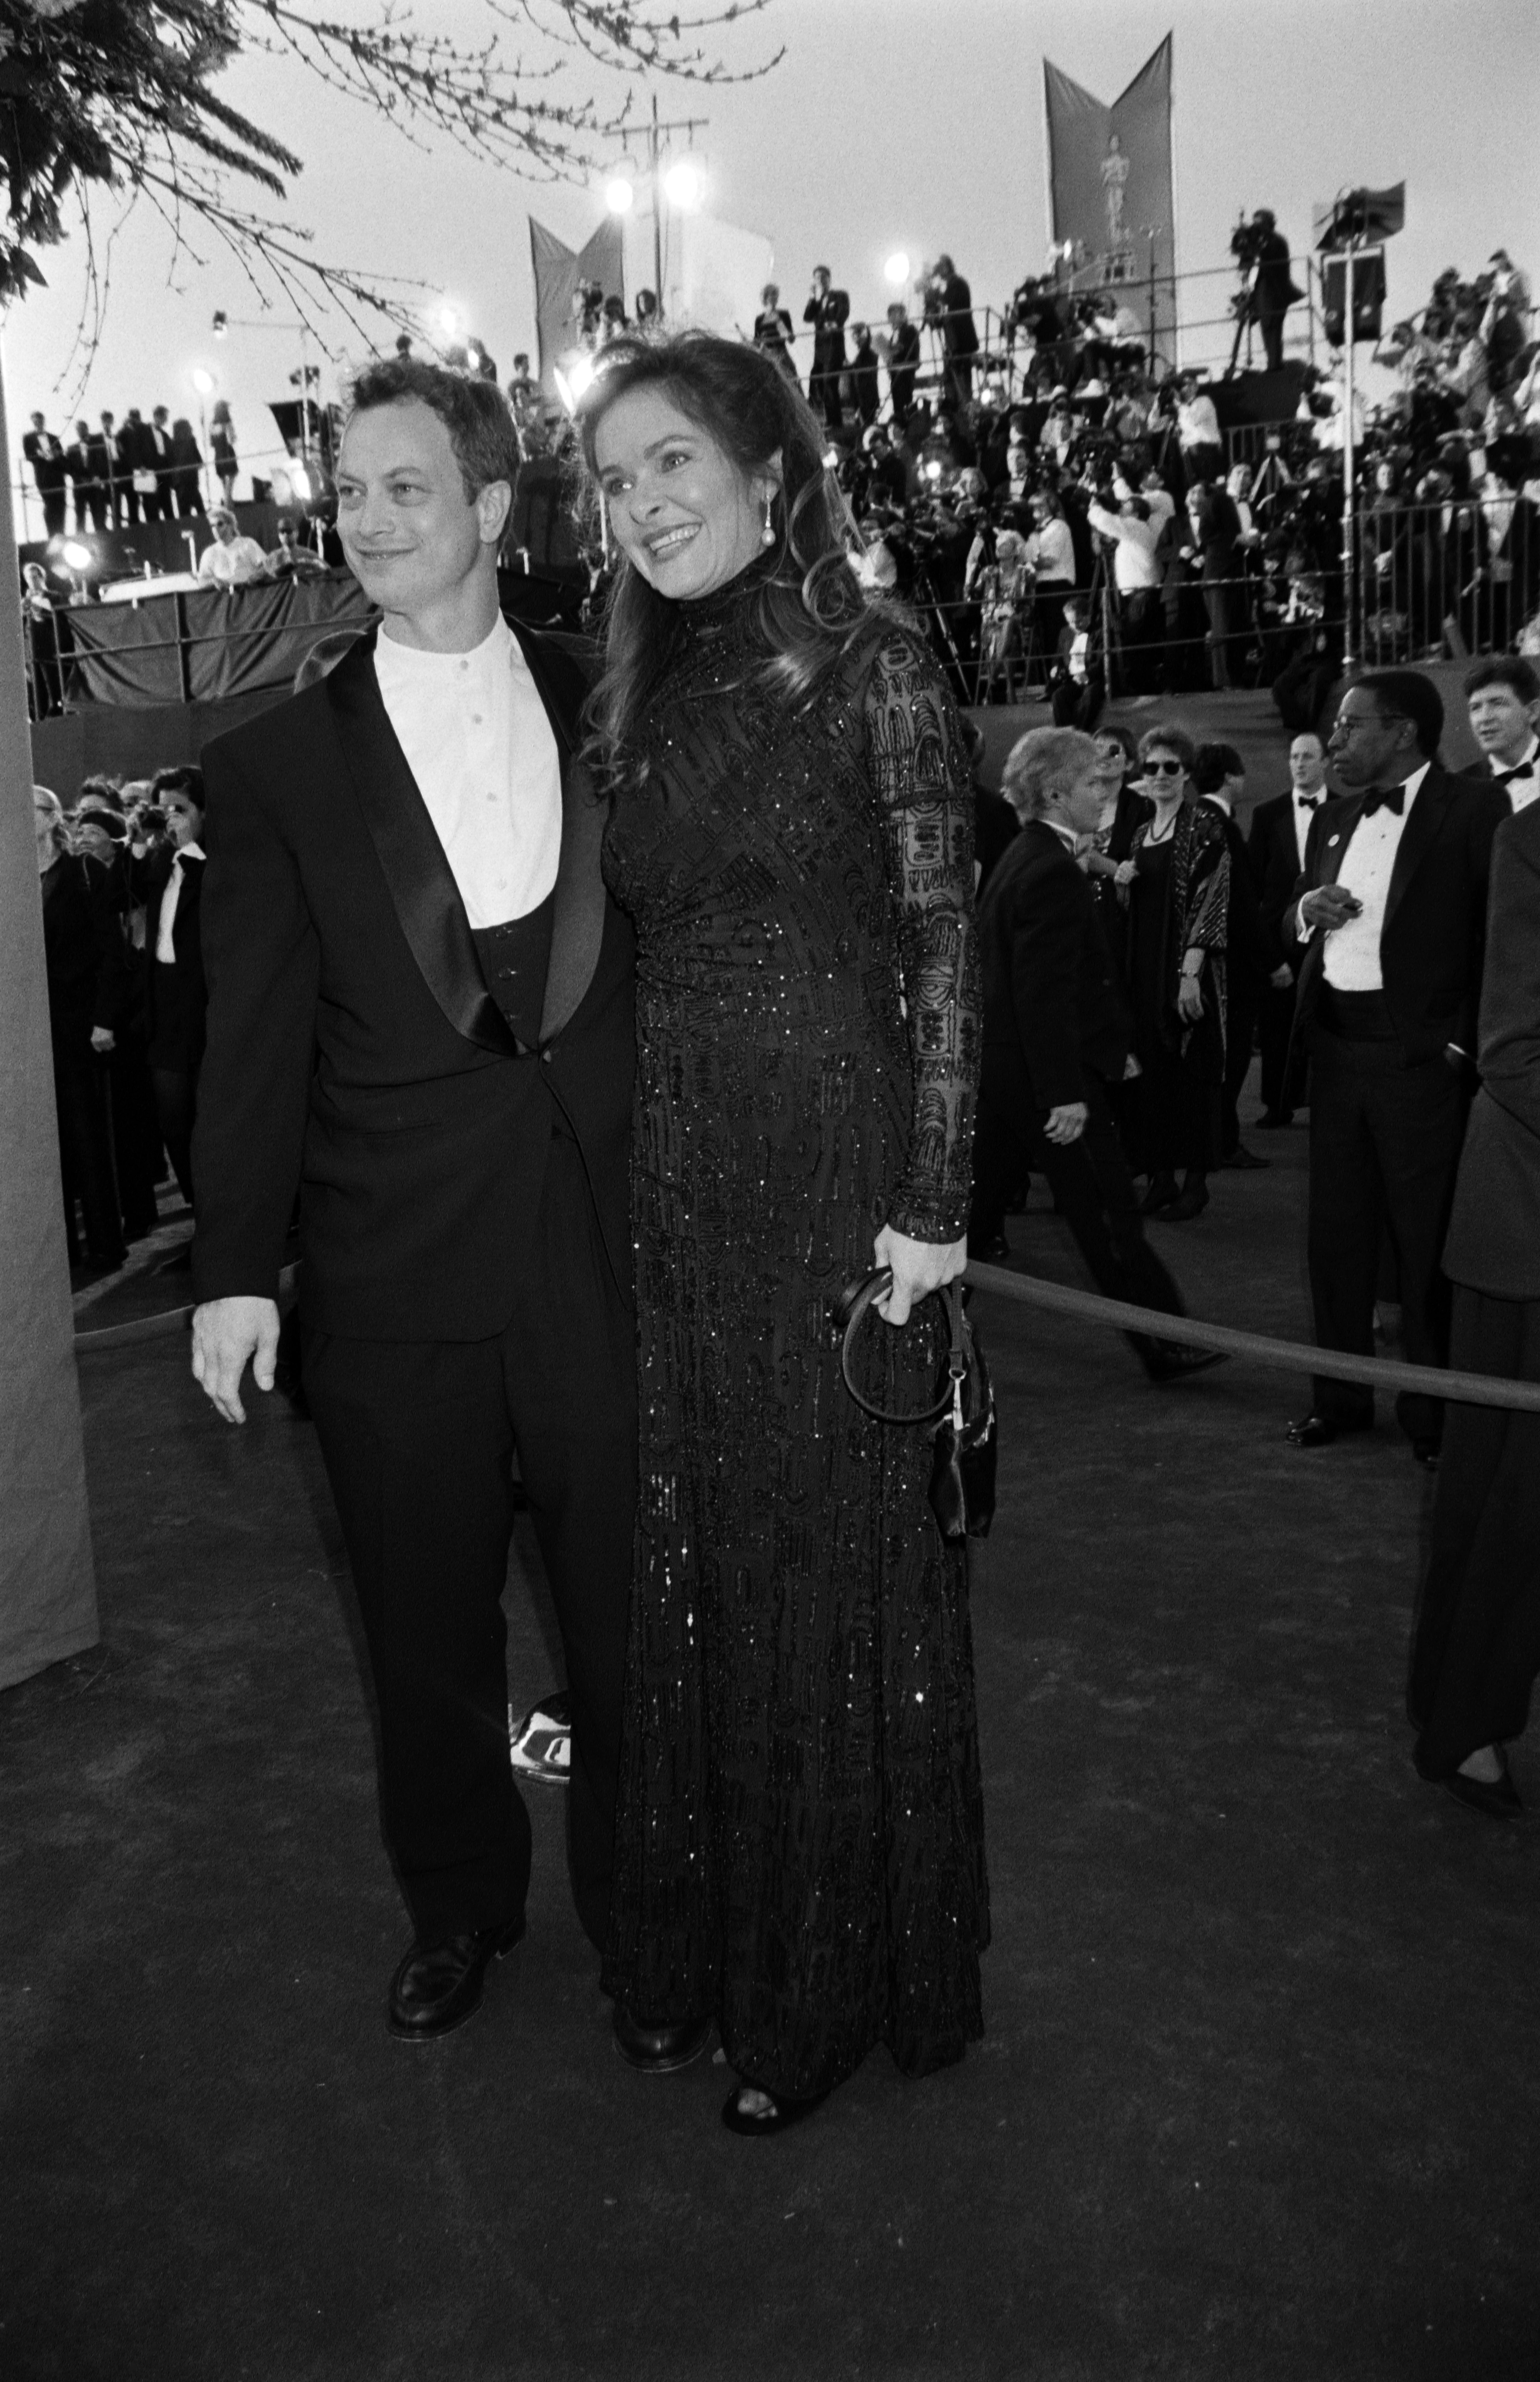 Gary Sinise and Moira Harris at the 67th Annual Academy Awards at the Shrine Auditorium in Los Angeles on March 27, 1995 | Source: Getty Images